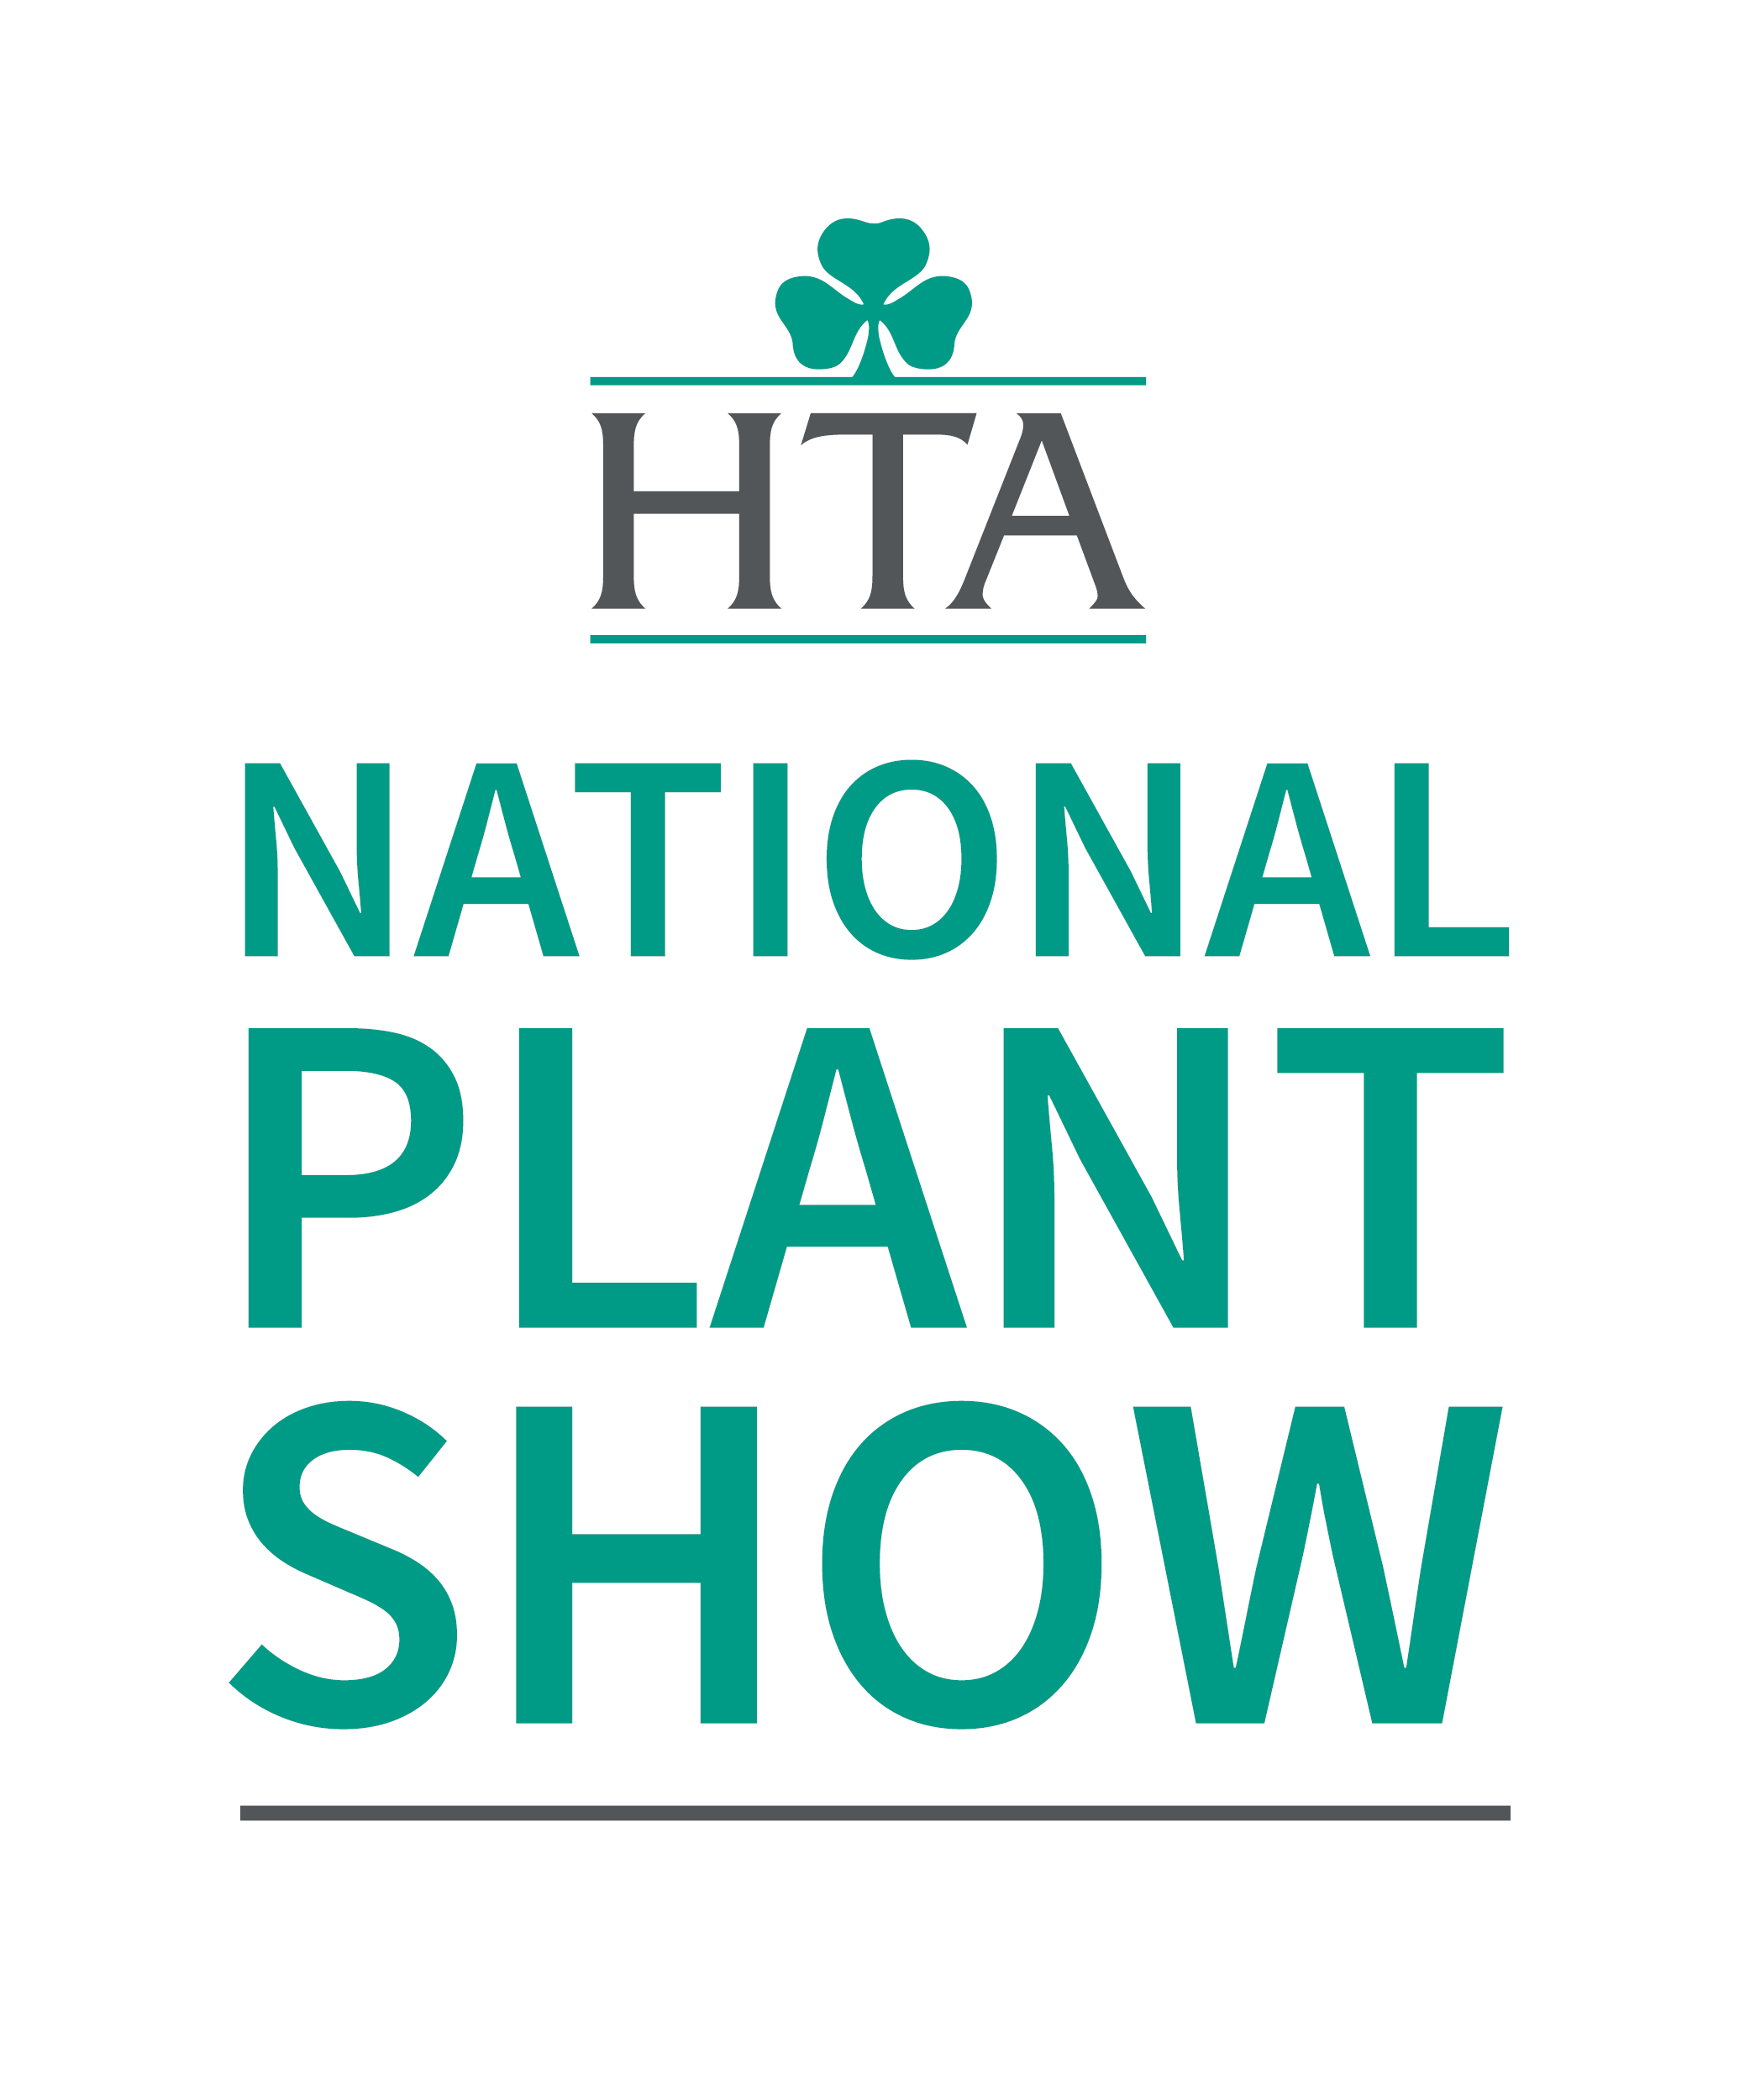 We're at the HTA National Plant Show 2023!